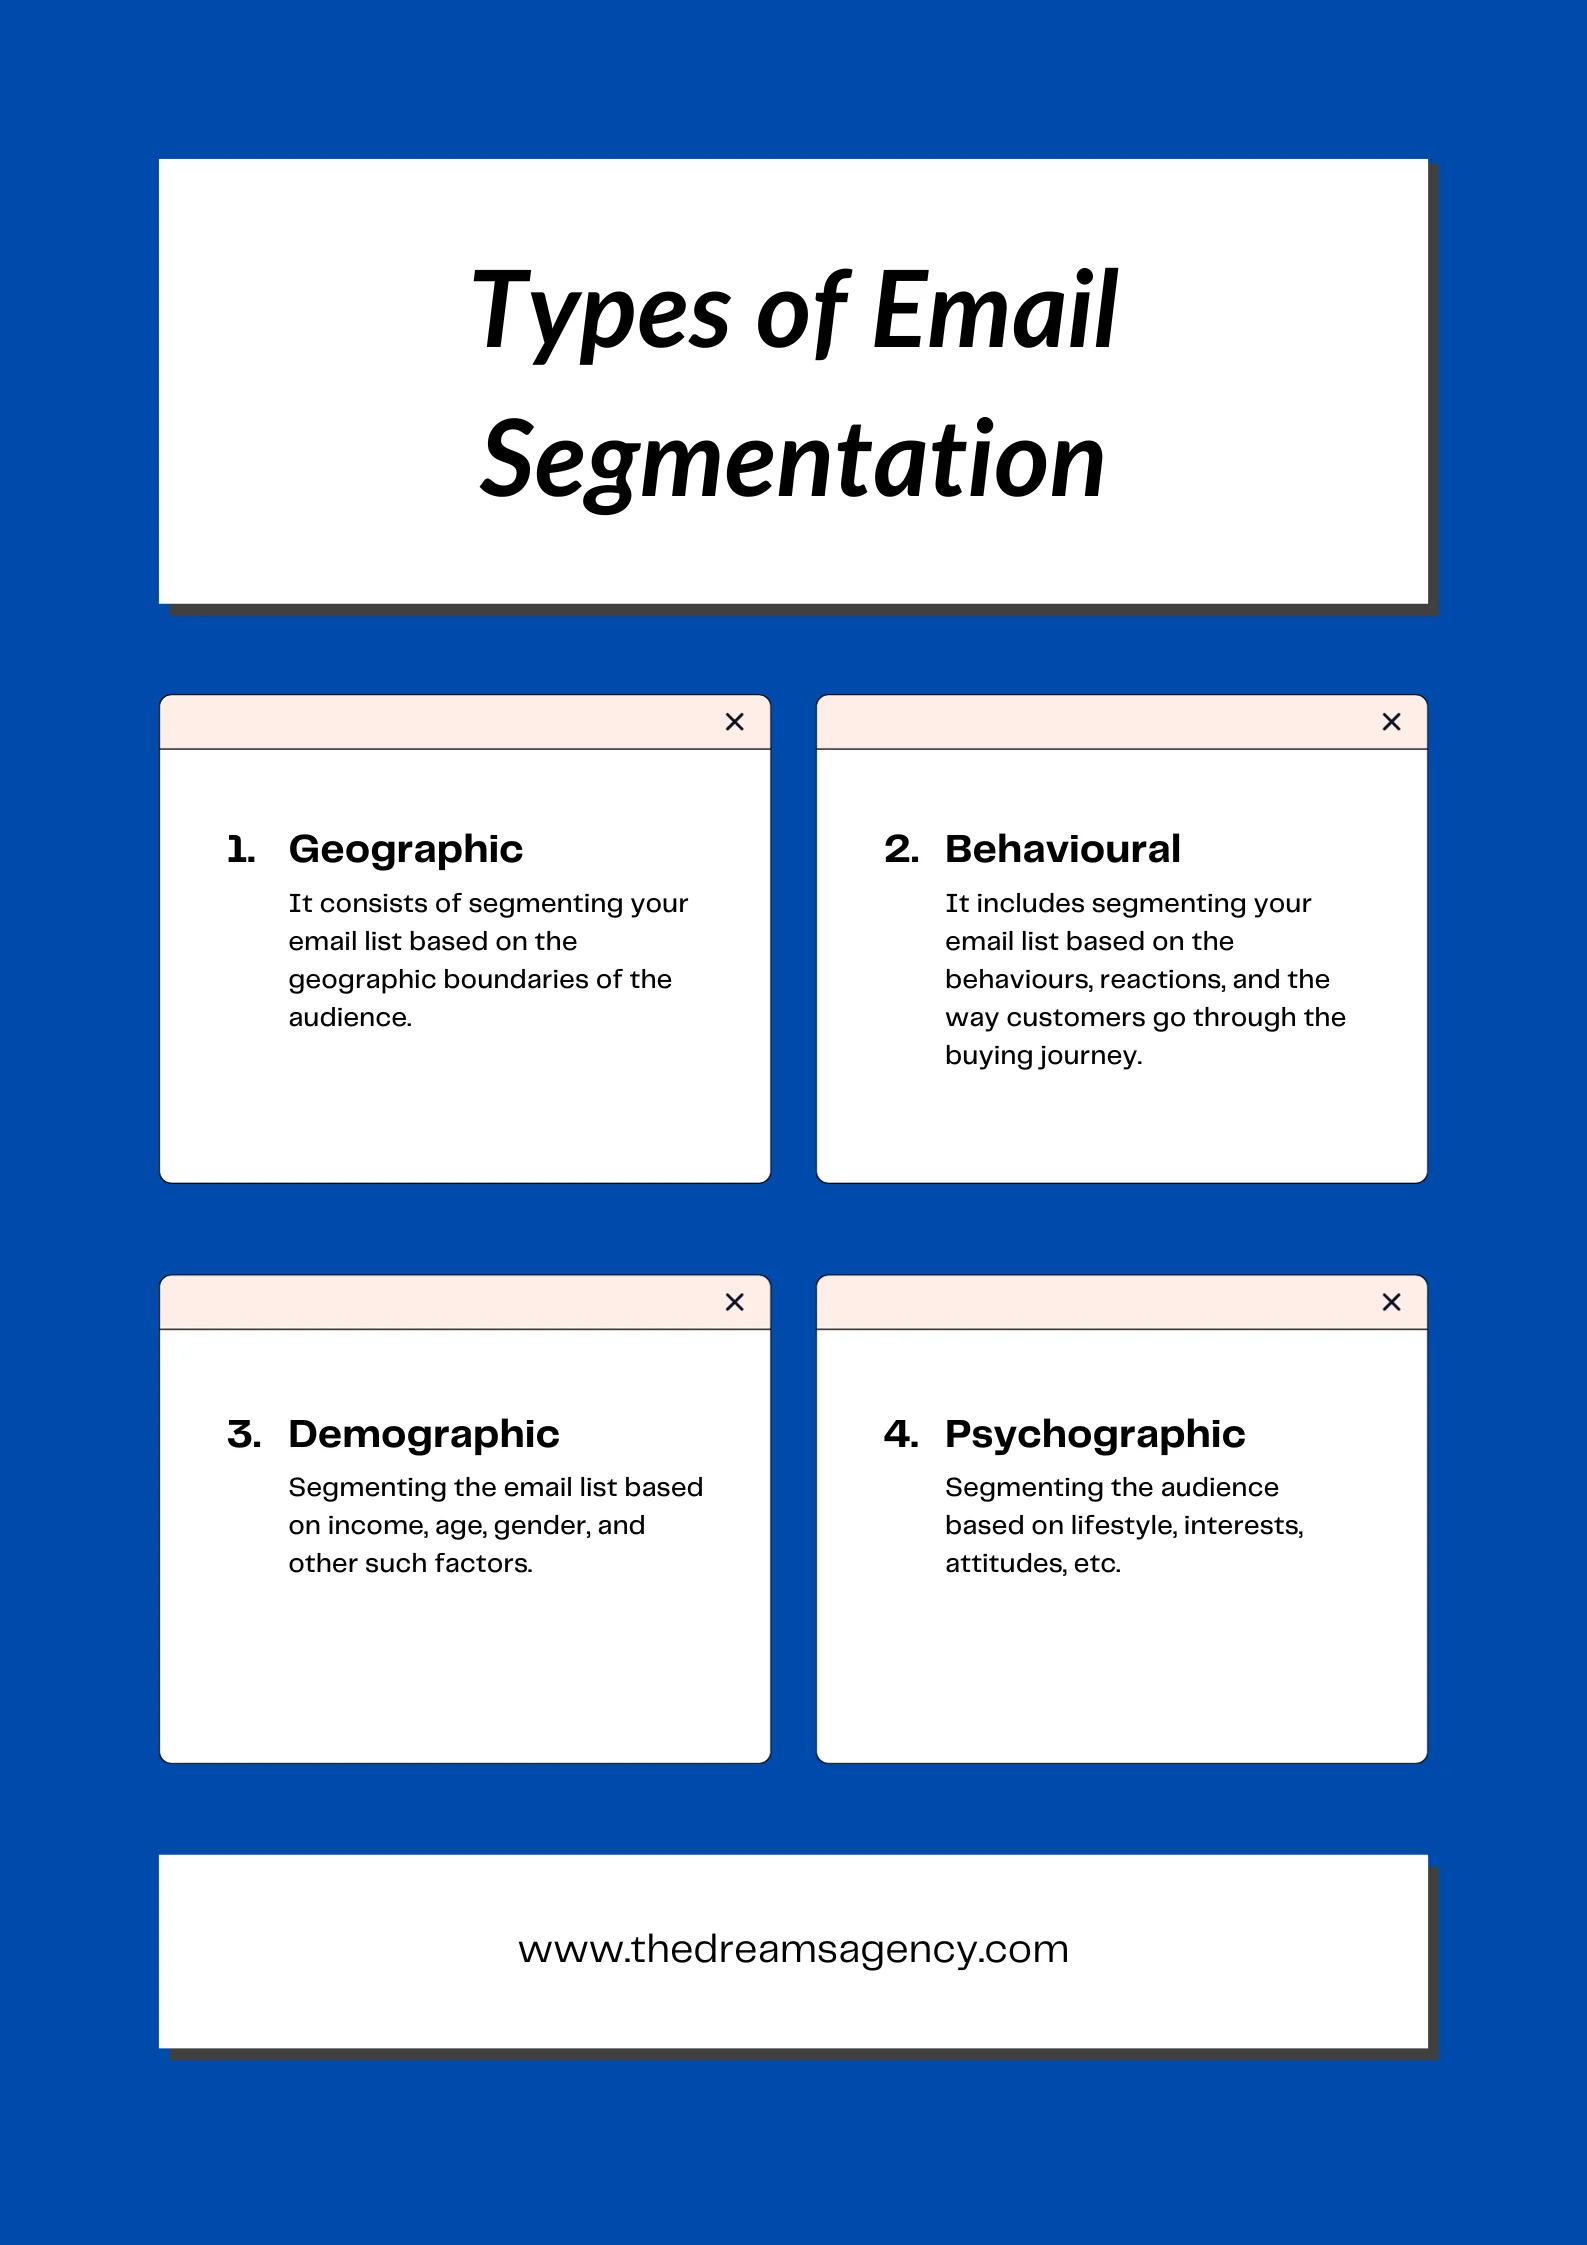 A chart on the types of email marketing segmentation